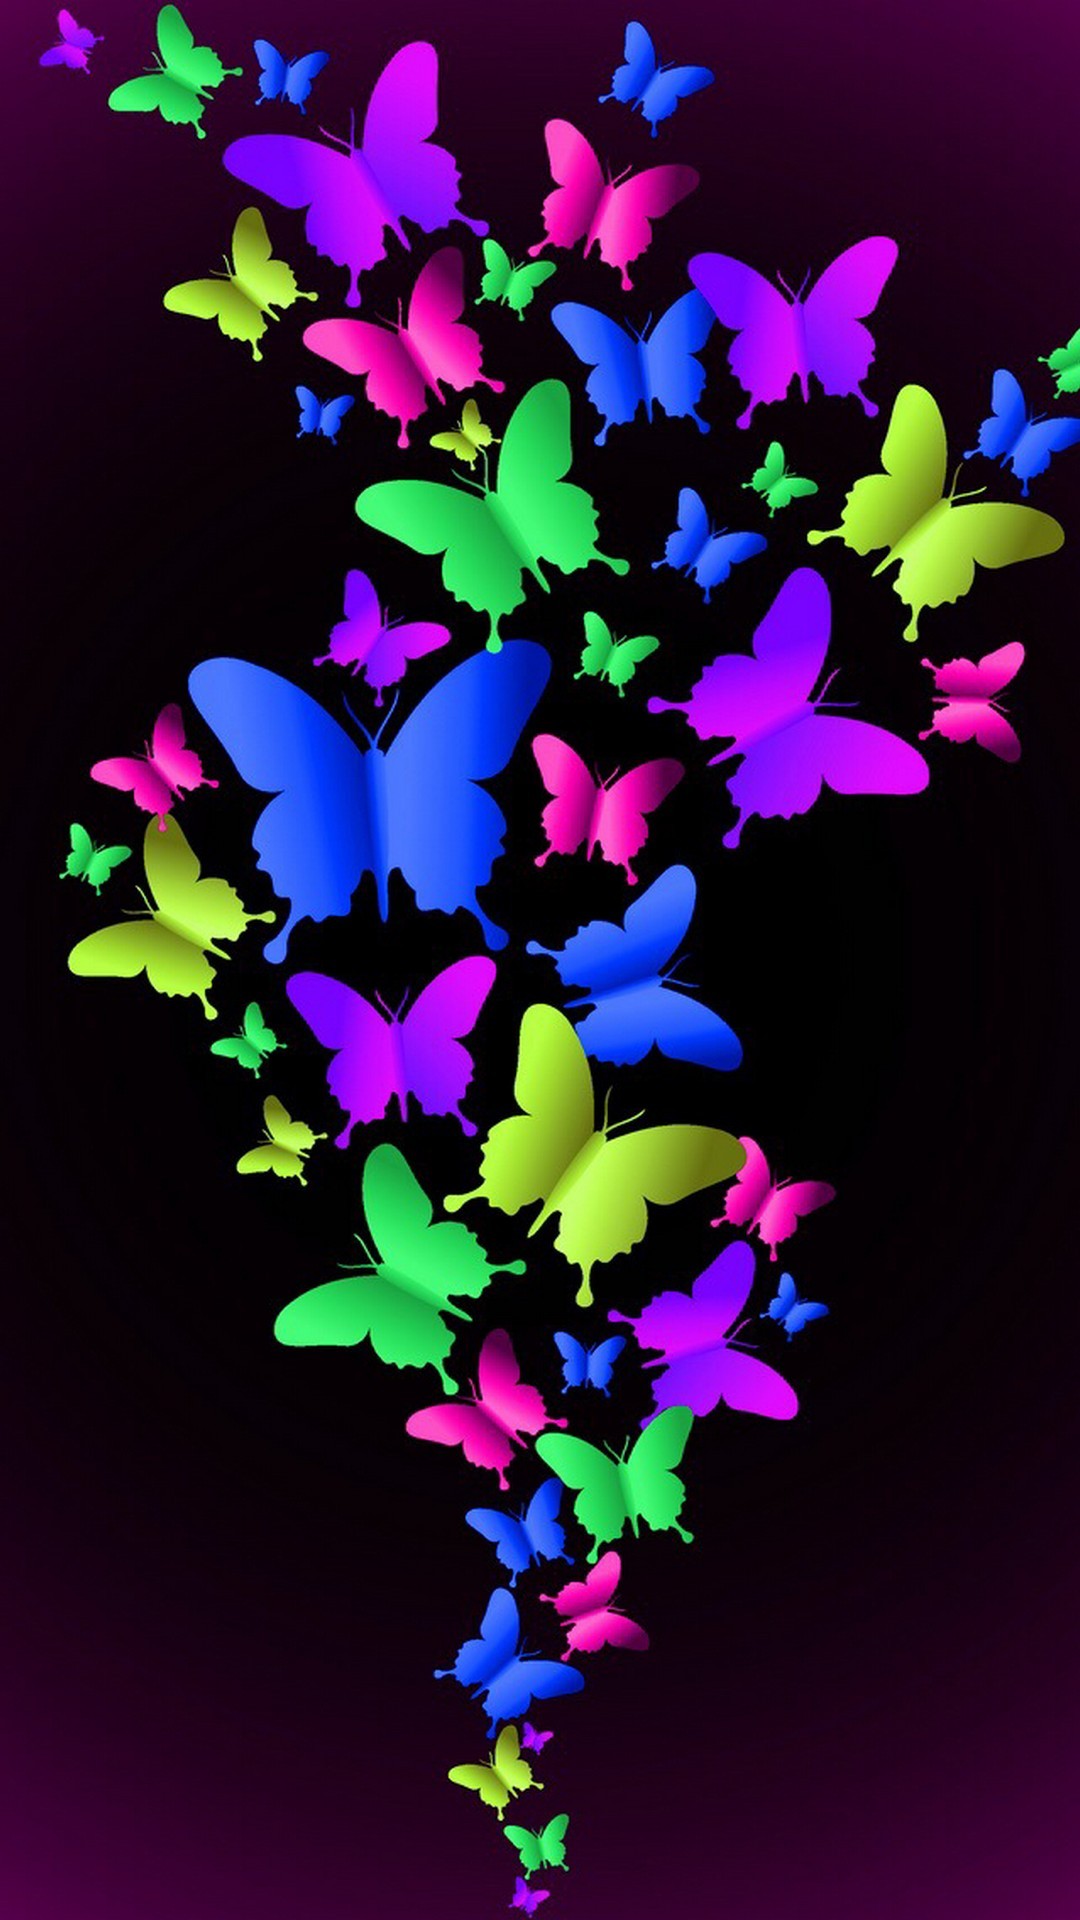 Blue Butterfly iPhone Wallpaper with HD Resolution 1080X1920